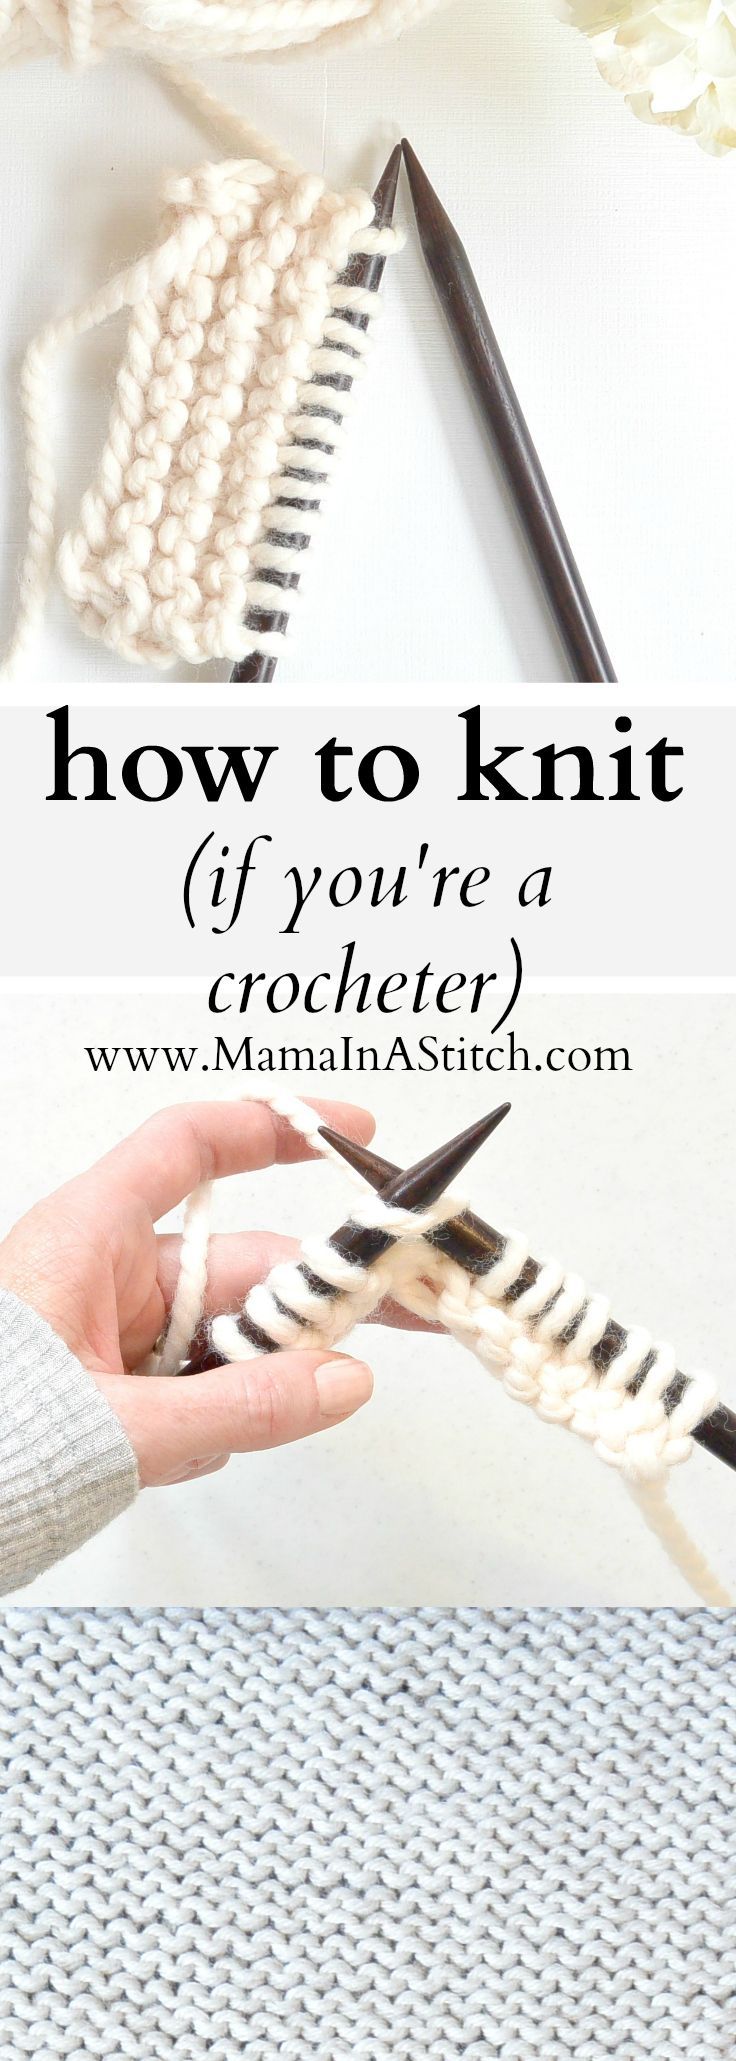 How To Knit If Youre A Crocheter Tutorial – (mamainastitch)